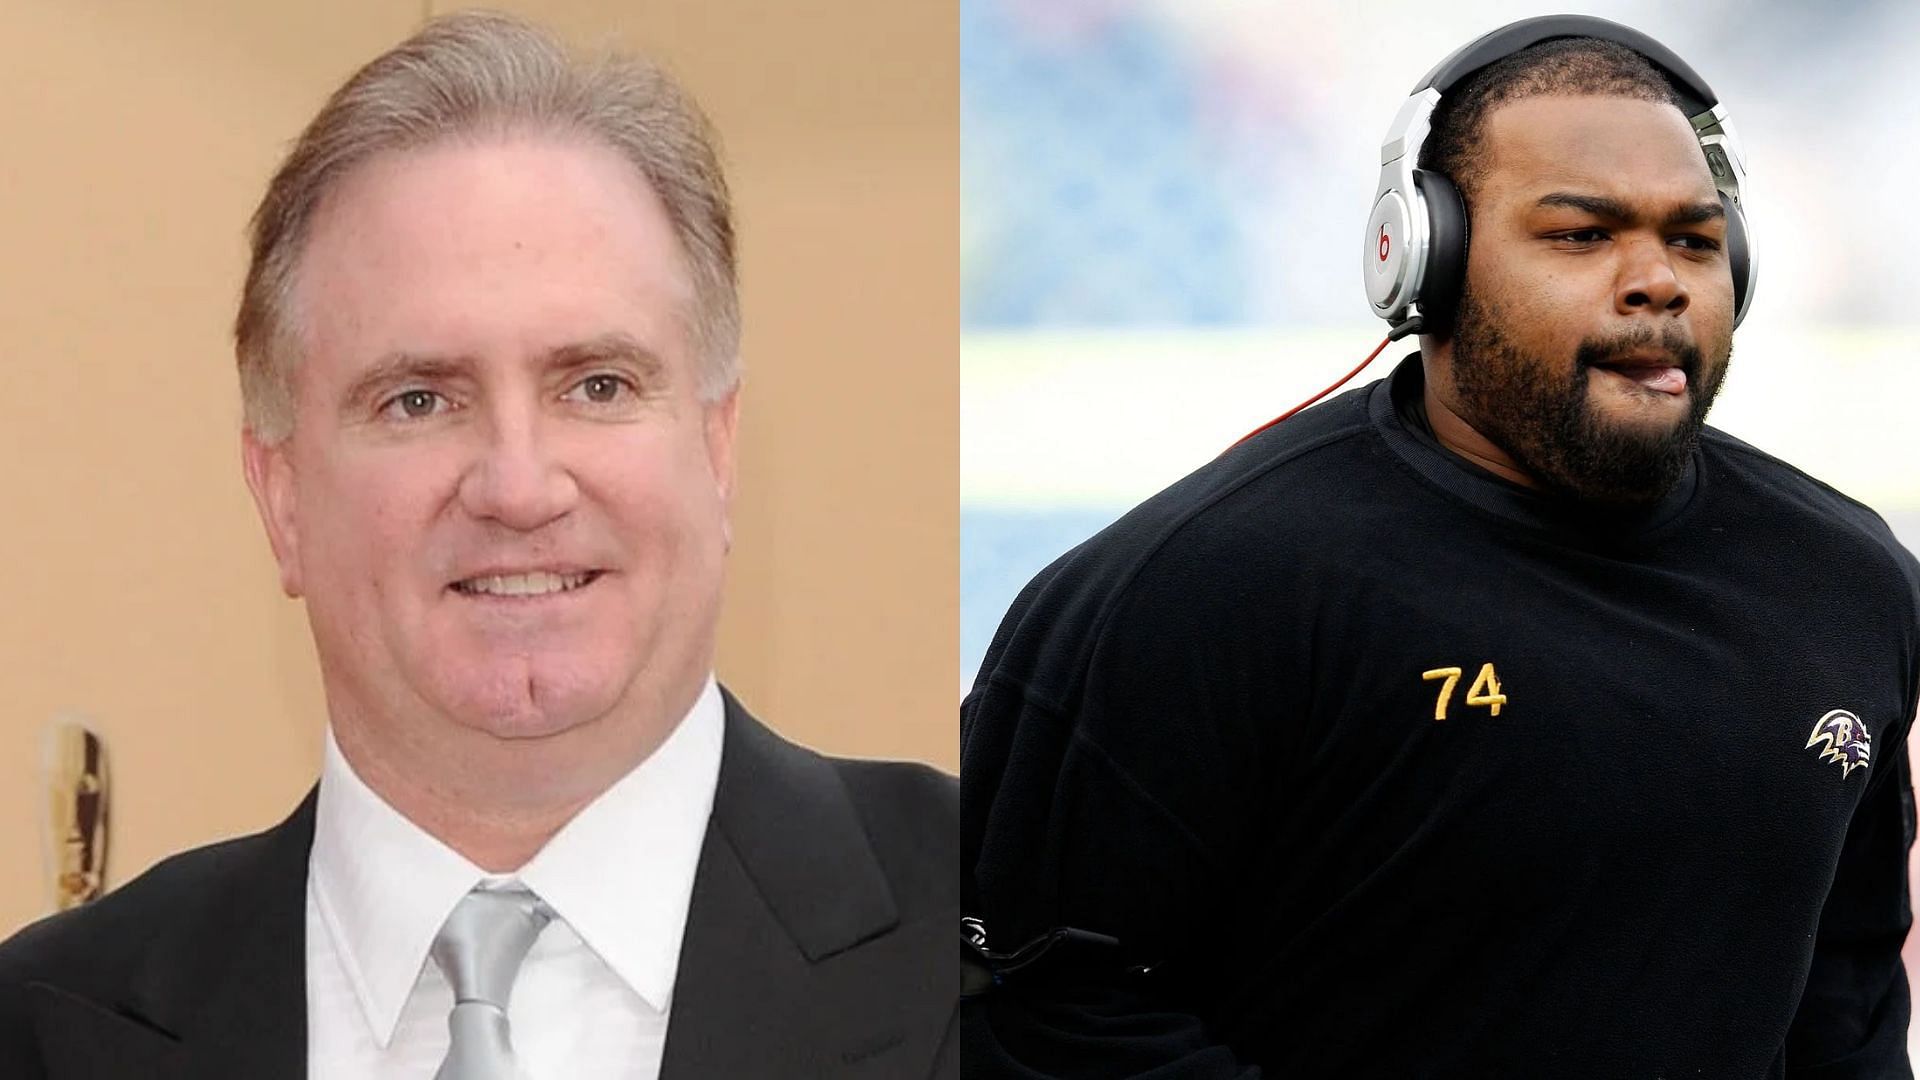 Sean Tuohy responded to Michael Oher